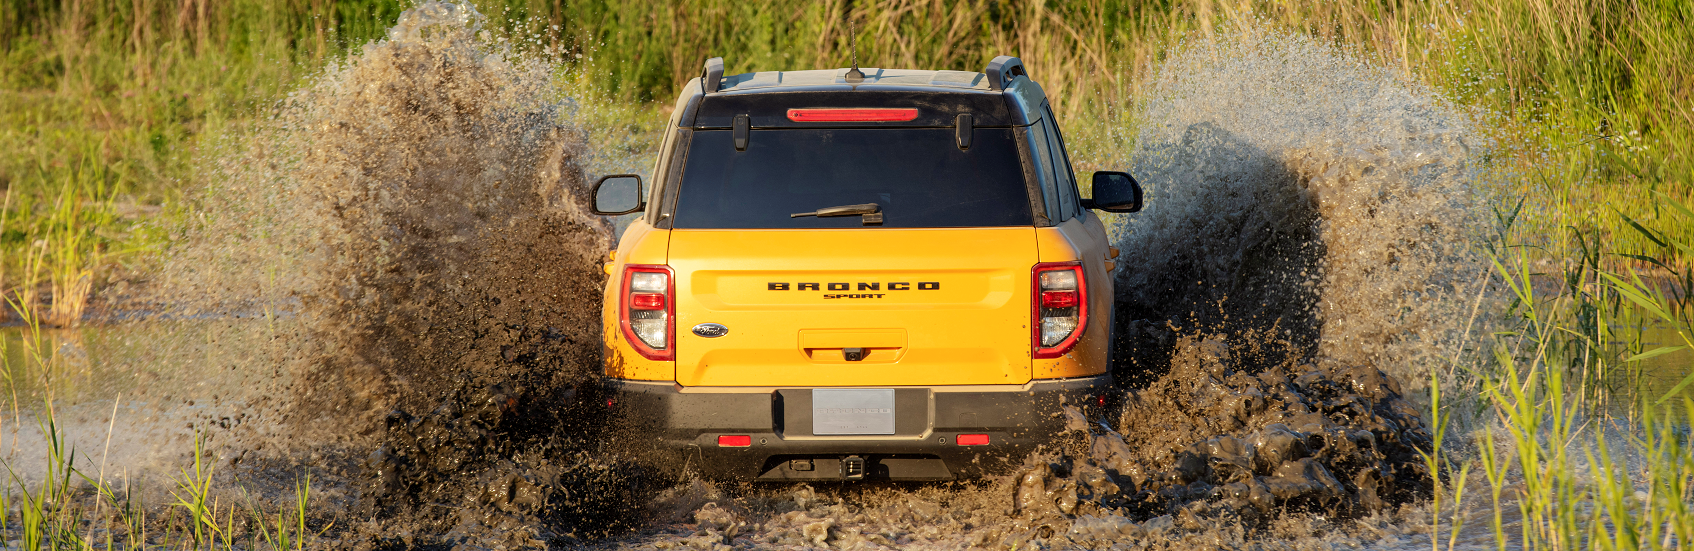 A yellow Ford Bronco pictured from behind splashing into a muddy stream with tall grass.